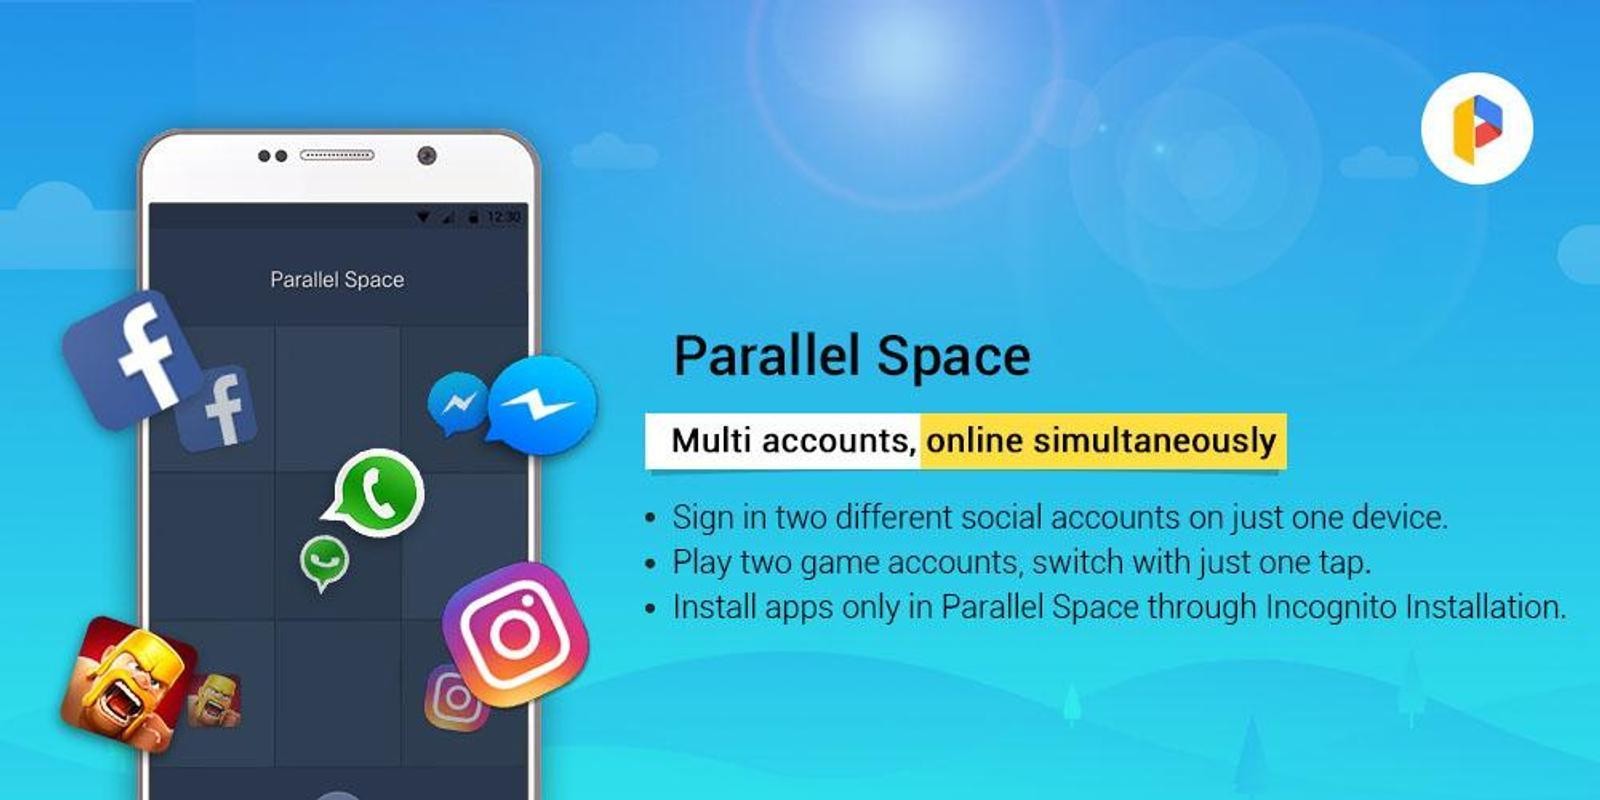 Parallel Space (WP)